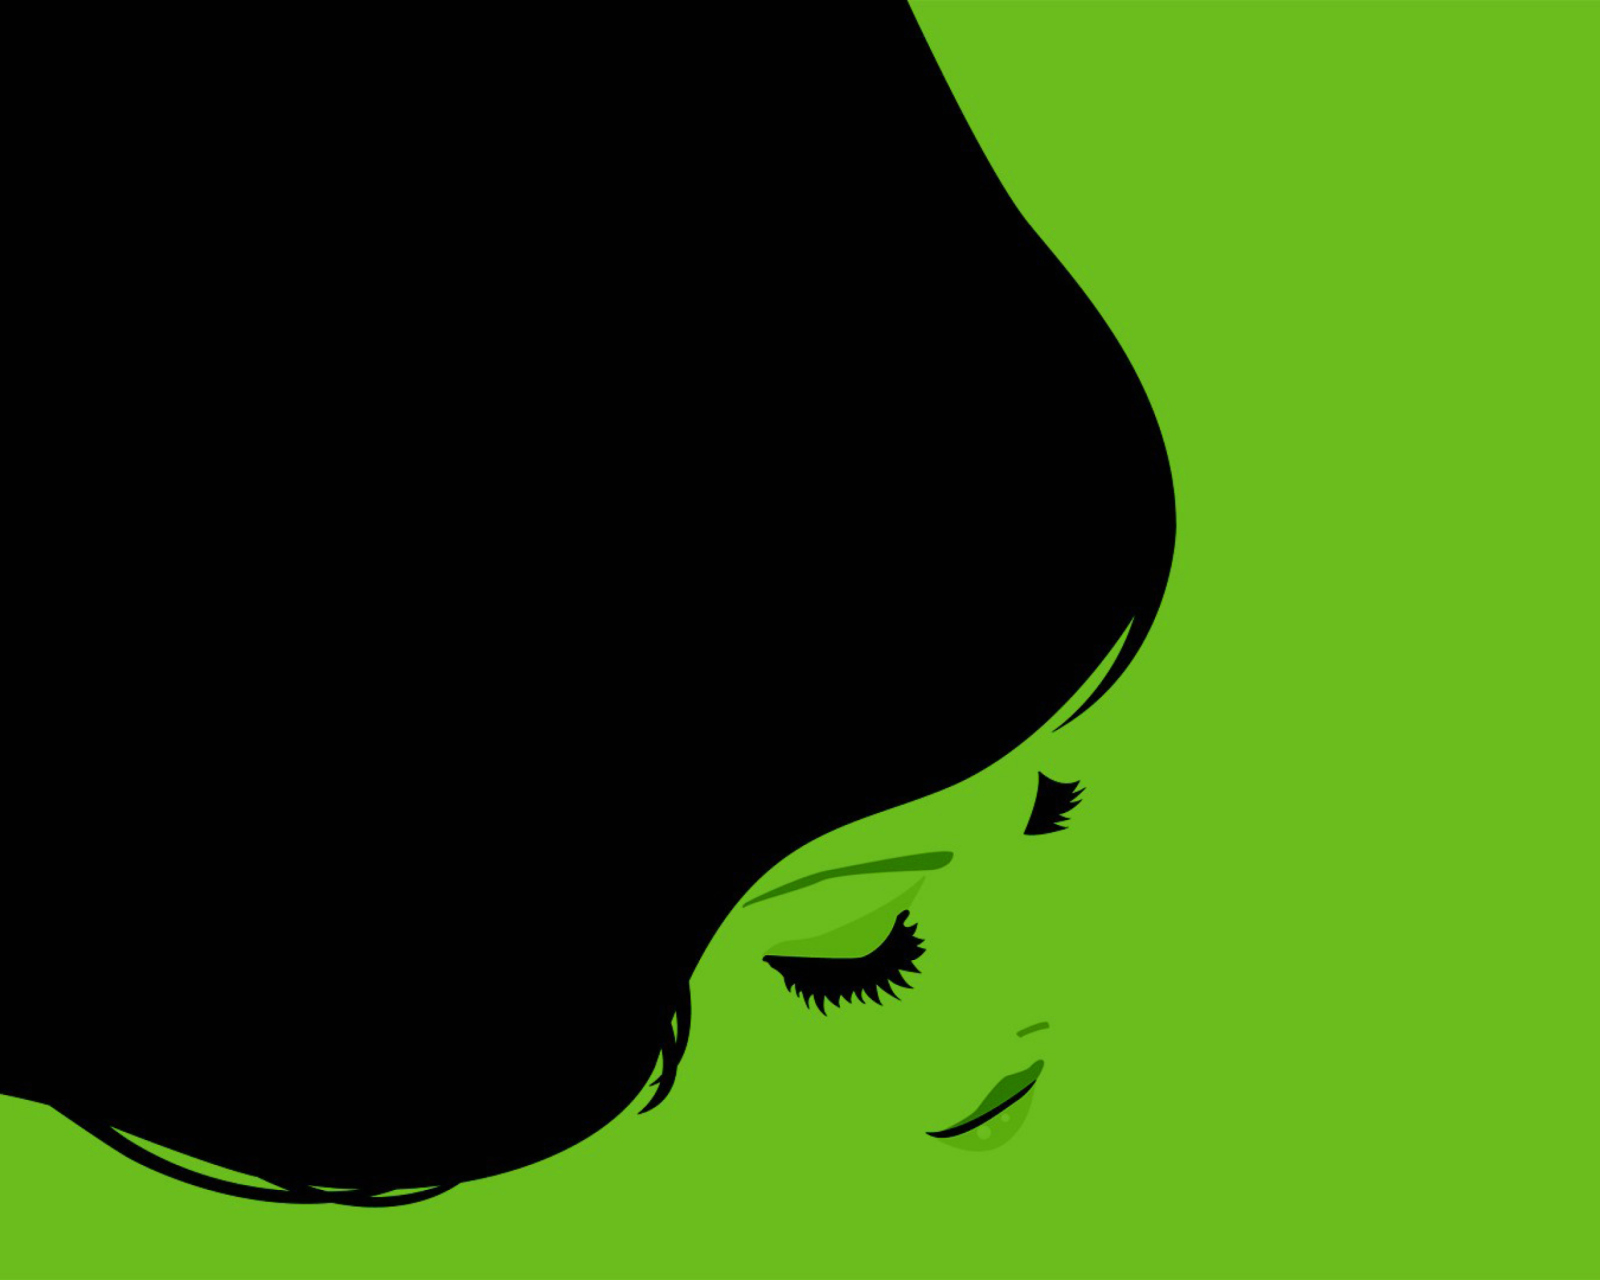 Girl's Face On Green Background wallpaper 1600x1280